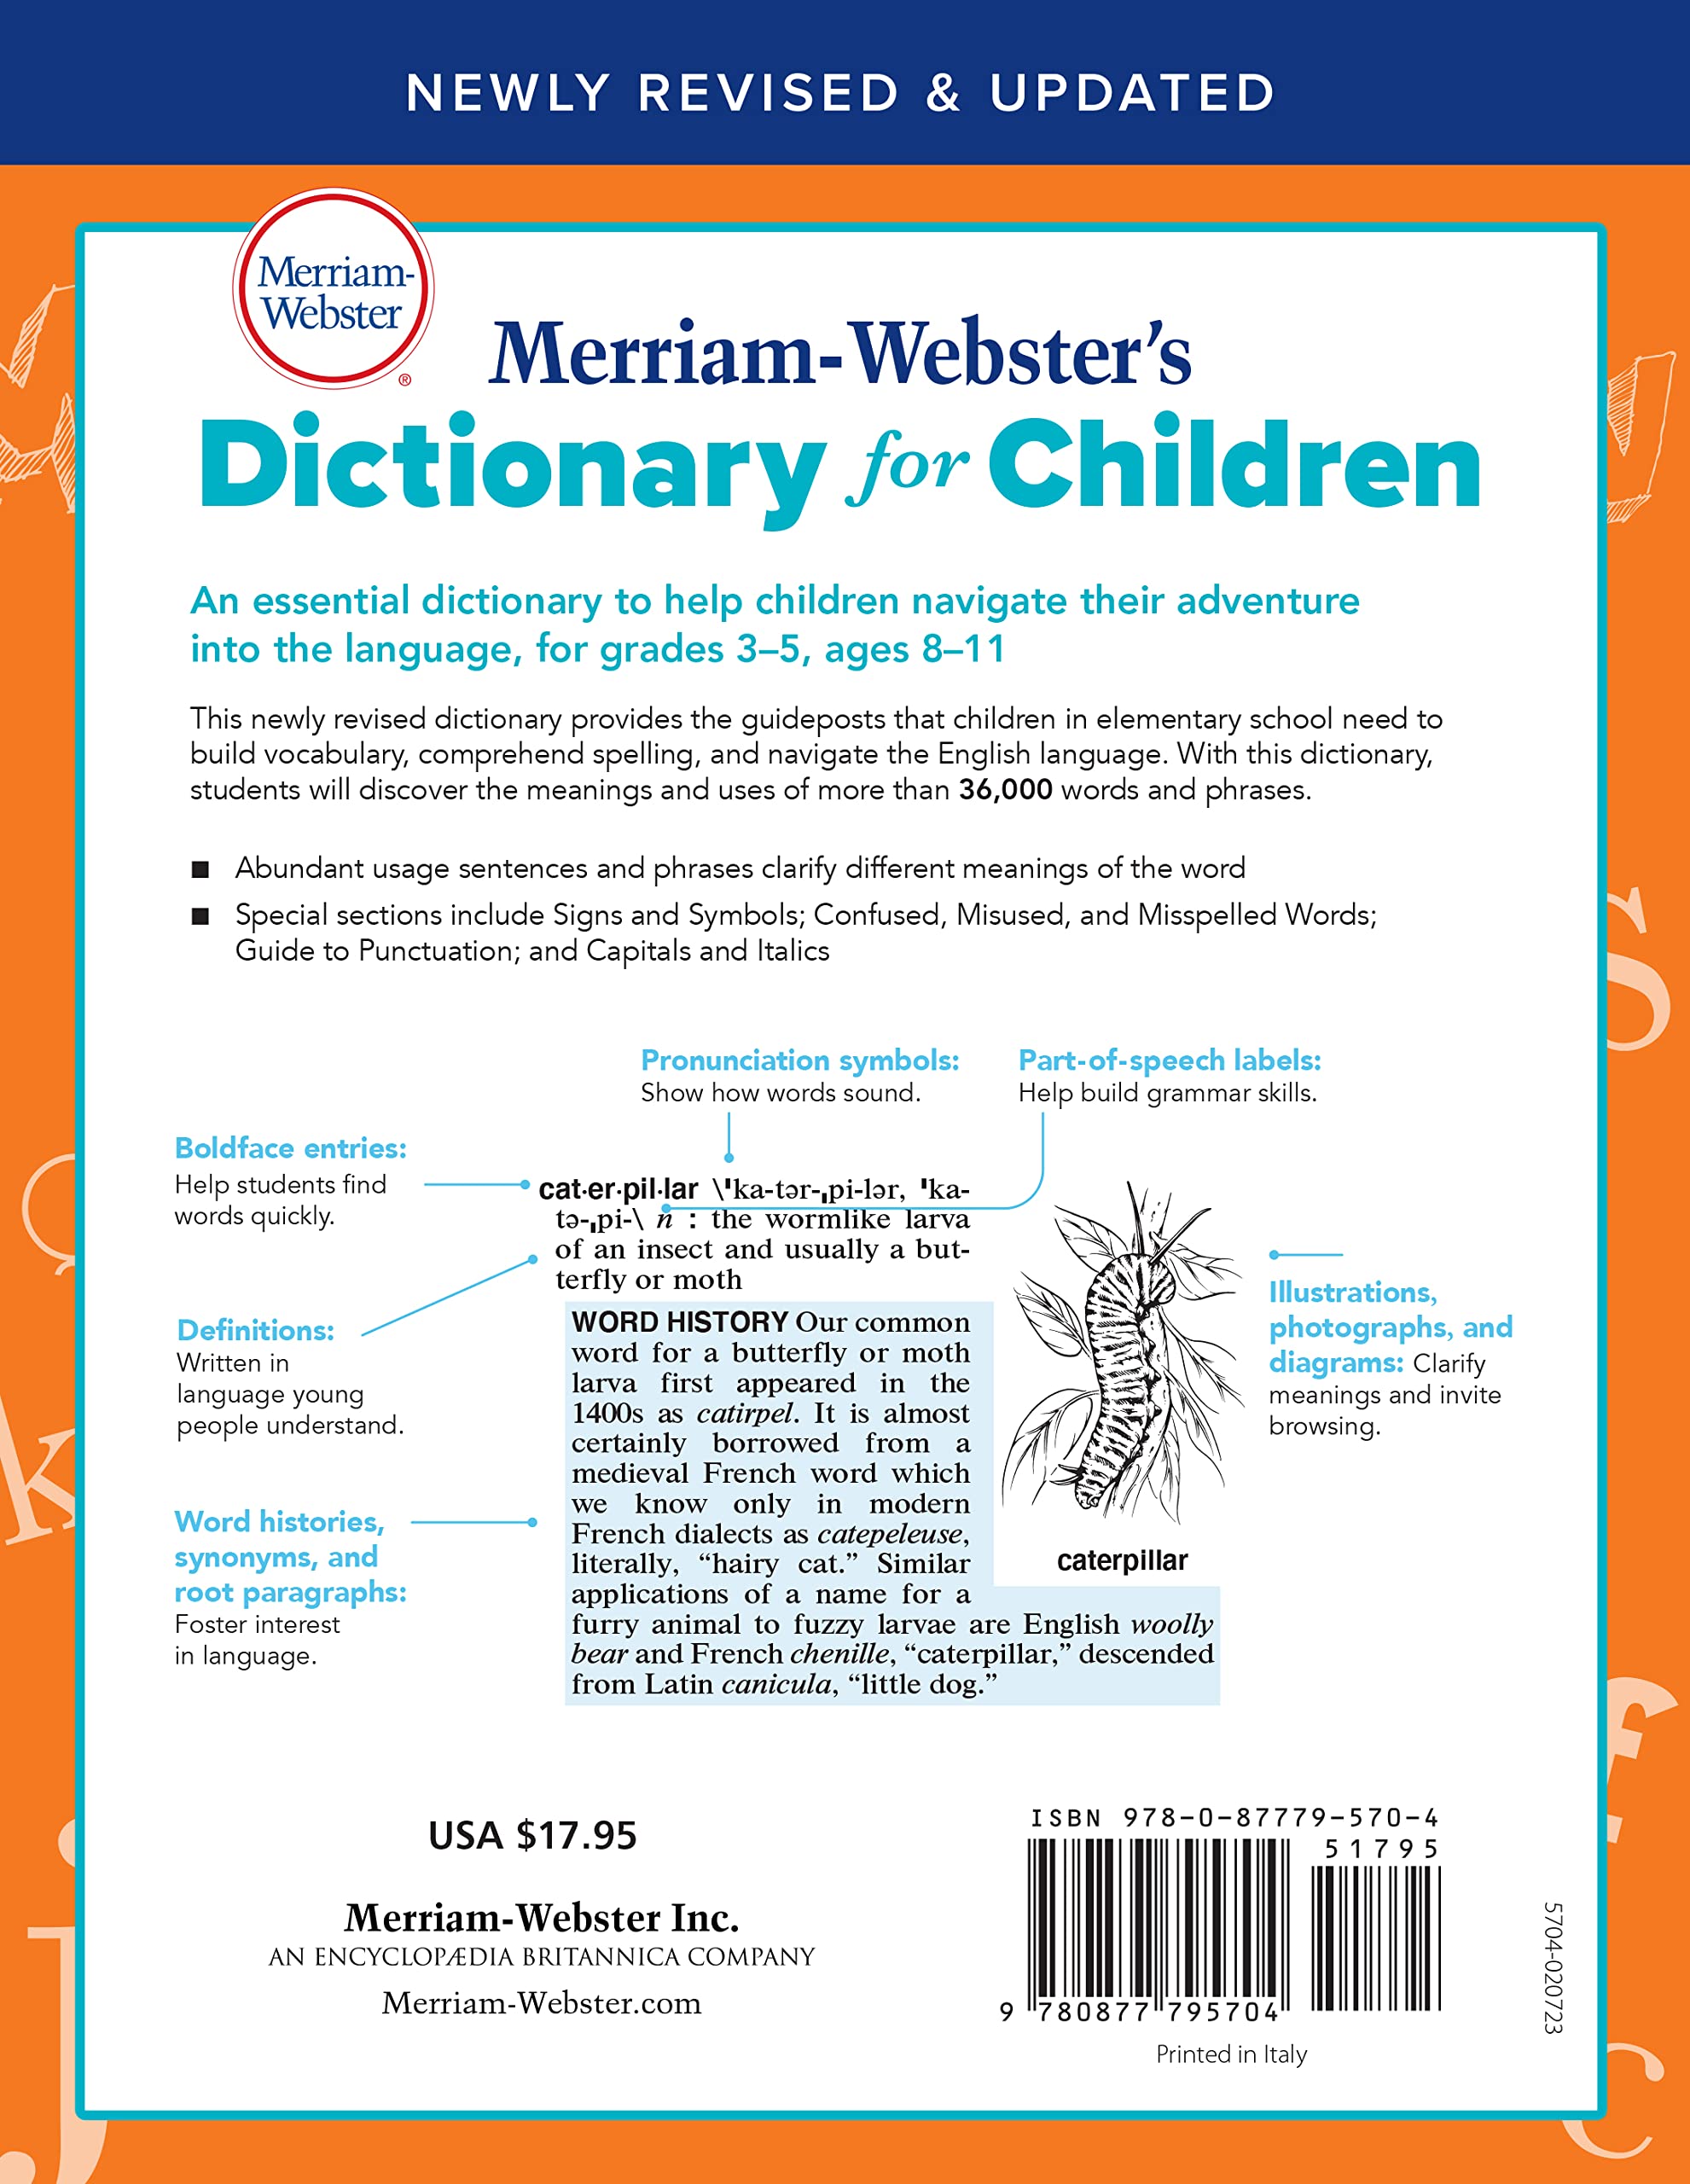 Merriam-Webster's Dictionary for Children, Newest Edition, 2021 Copyright